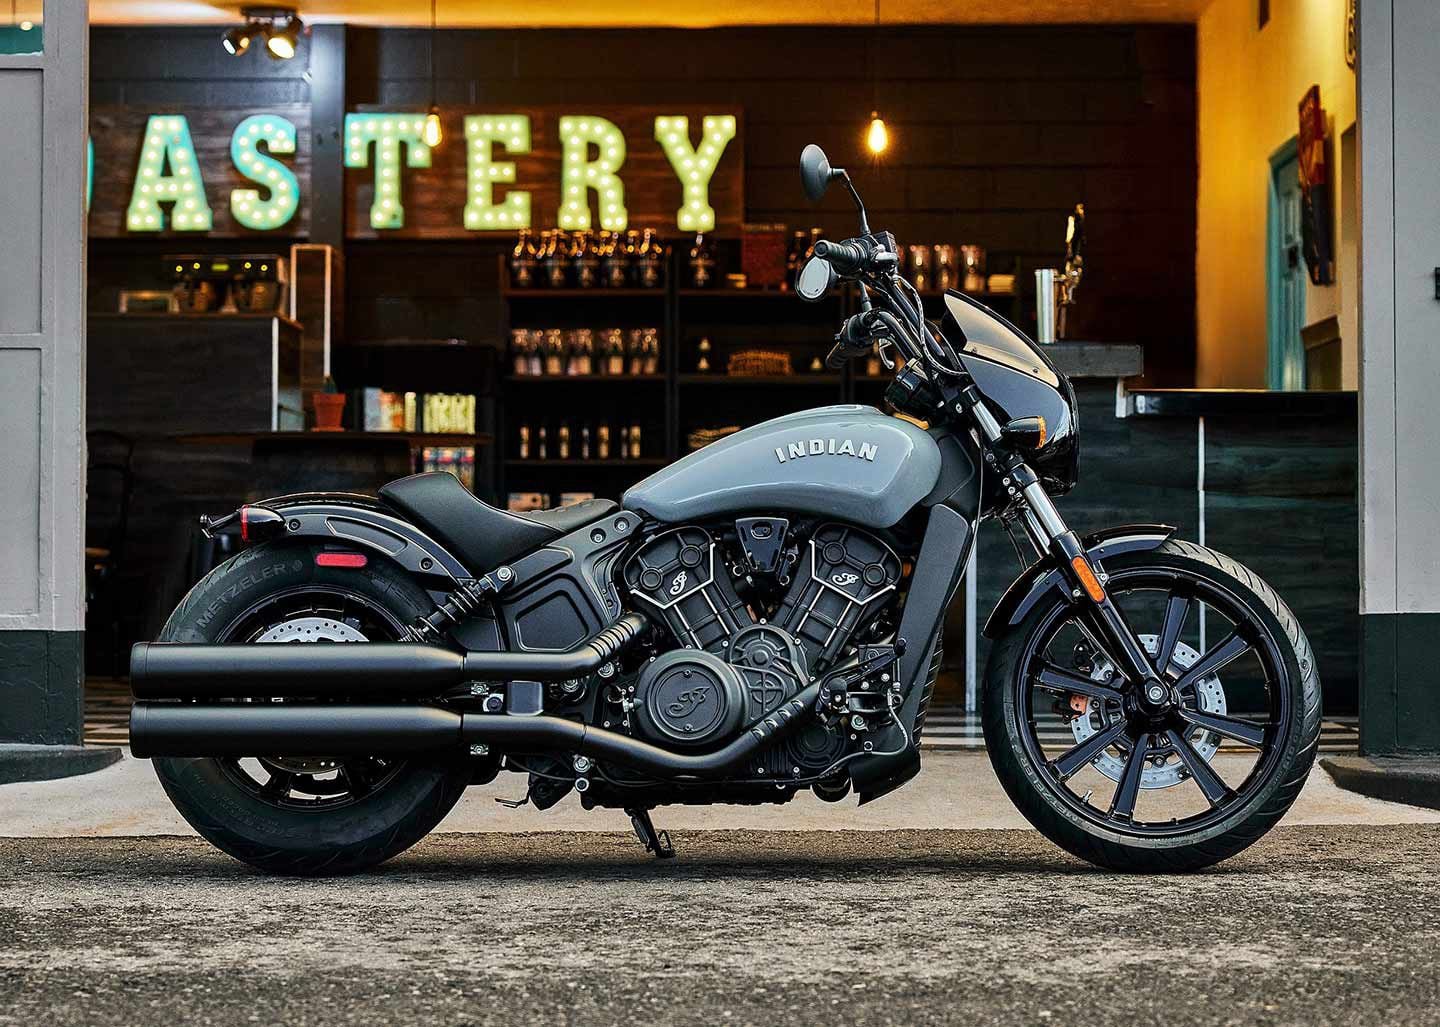 By now you know the formula; all the other “Sixty” models run with the same smaller-displacement 999cc V-twin found in the Scout Sixty. No surprise, the Scout Rogue Sixty is also unchanged for 2024, and the base-model Rogue Sixty will empty your wallet of $11,249 (same as last year)—if you get it in Black Metallic (add $900 for ABS). Or opt for the higher-priced Storm Gray or Spirit Blue Smoke colors.